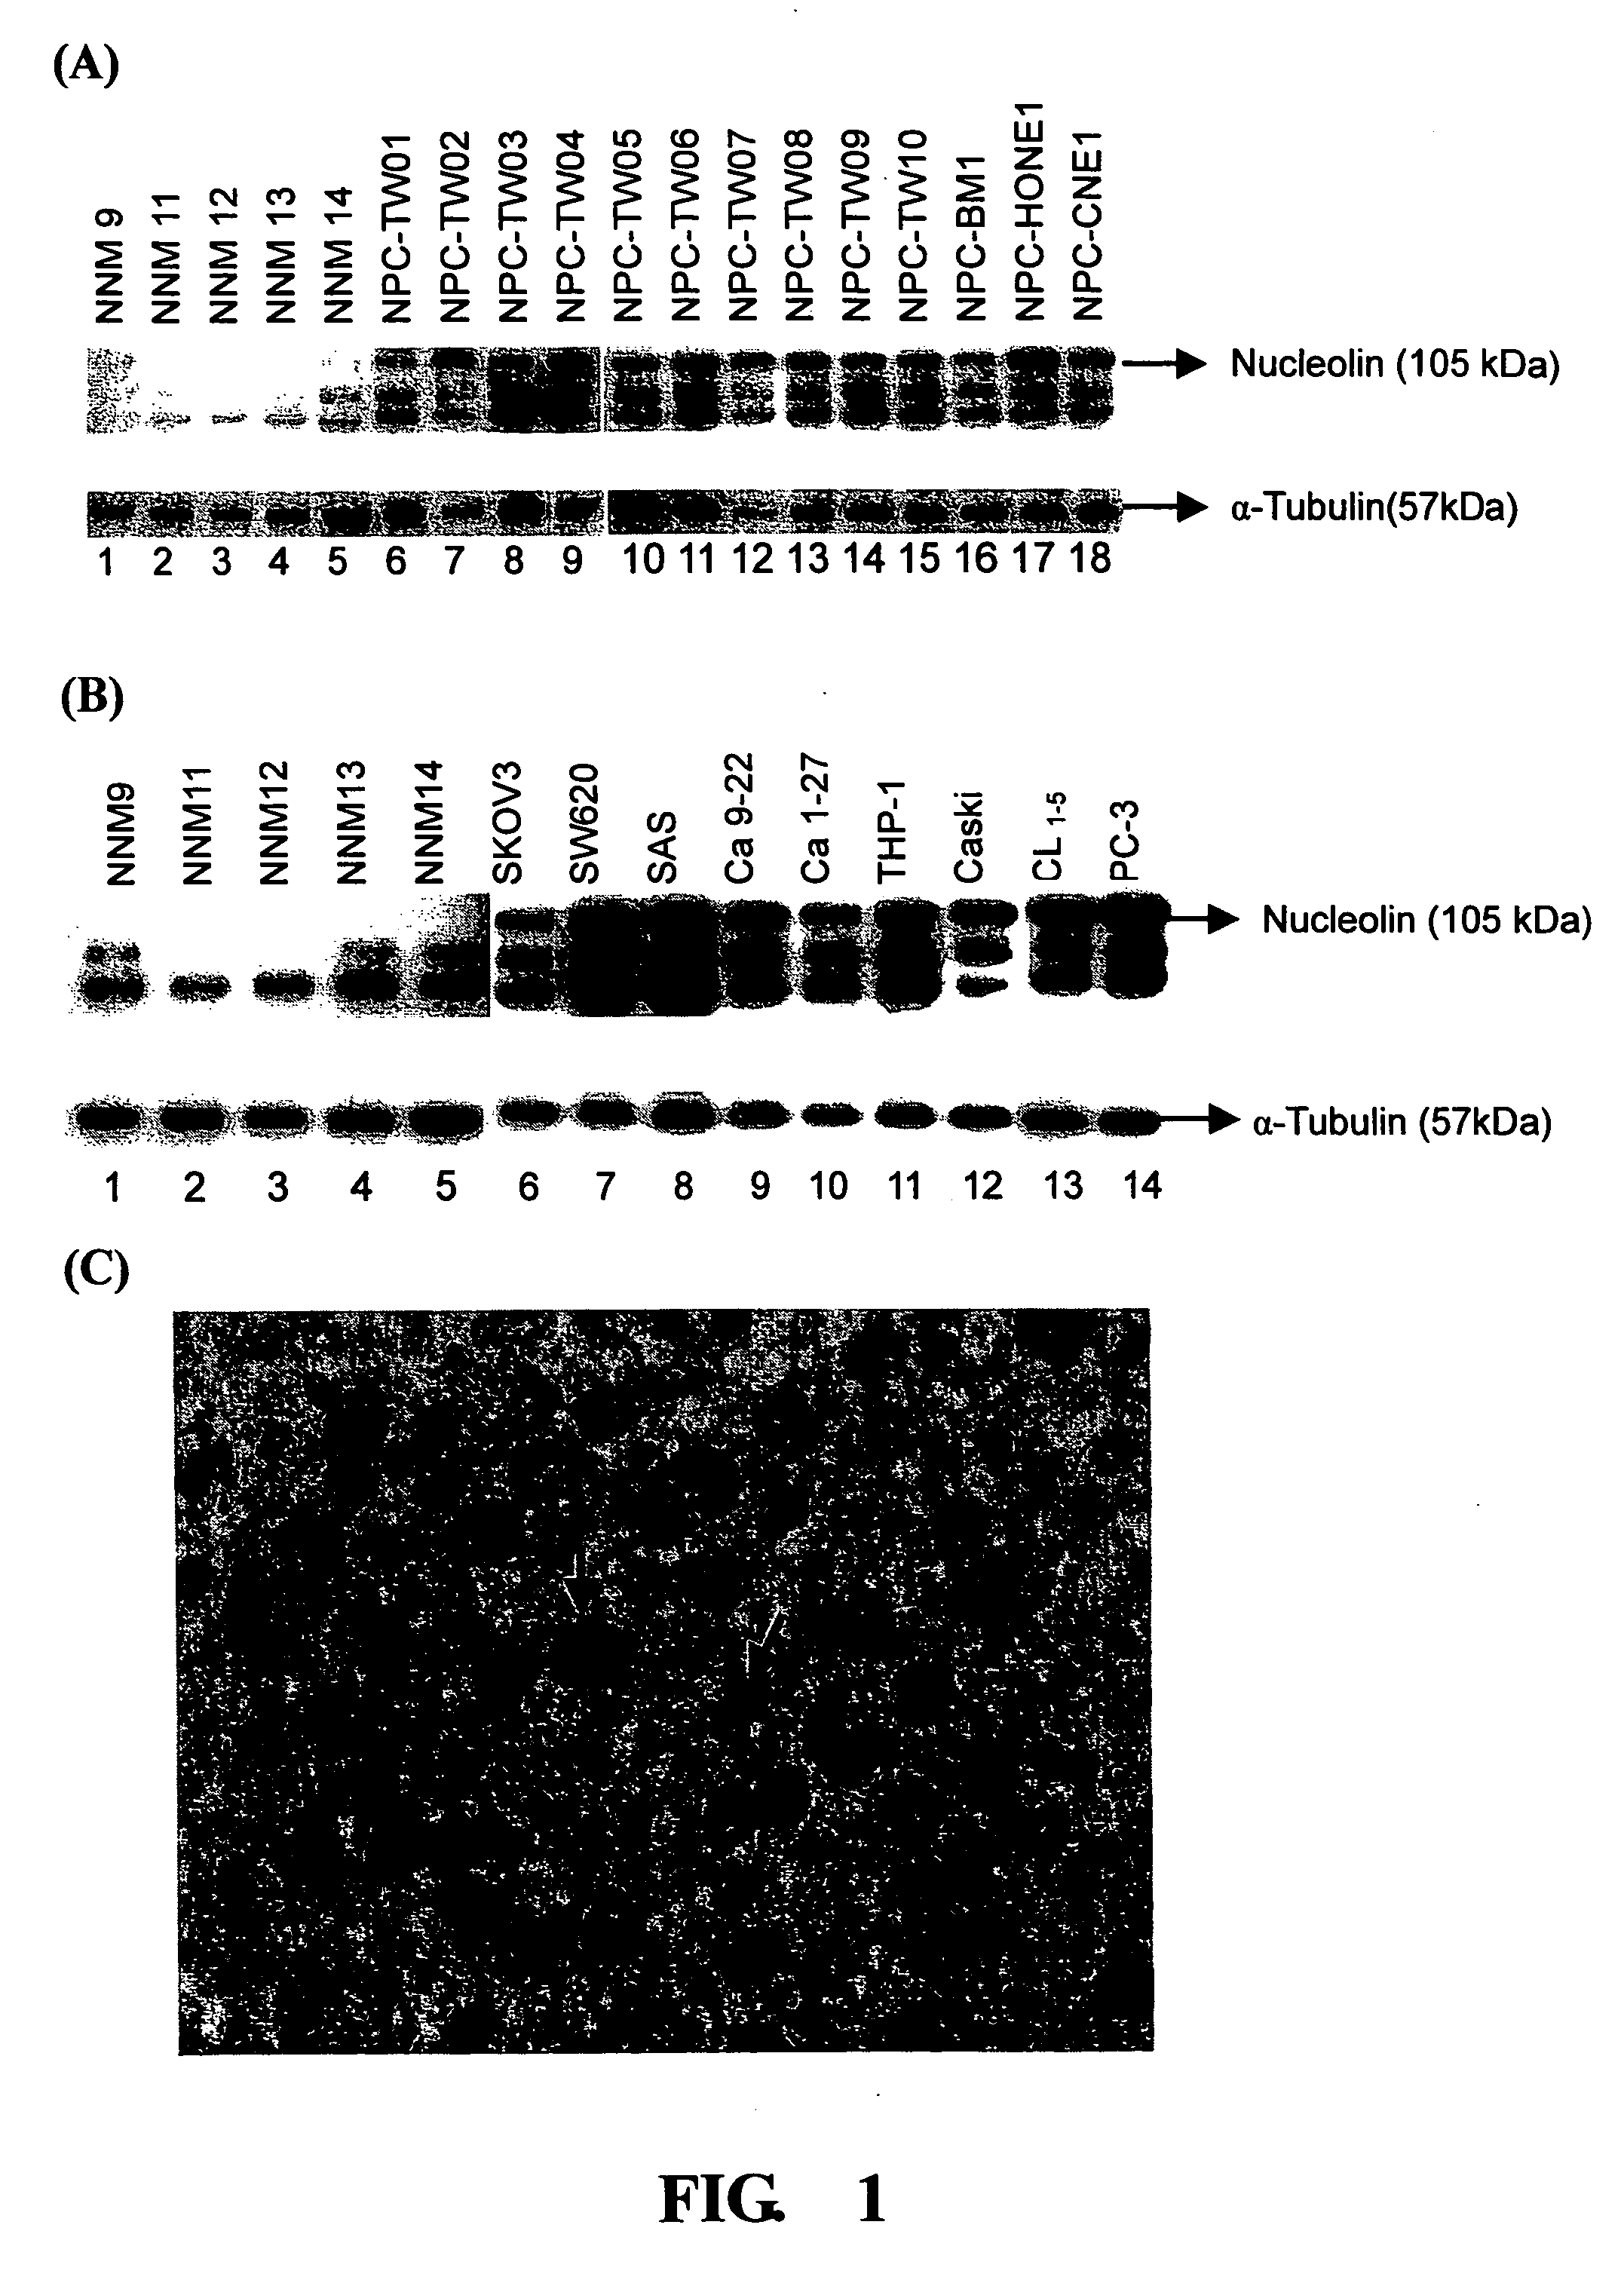 Nucleolin antisense sequence for inhibition of cancer cell proliferation